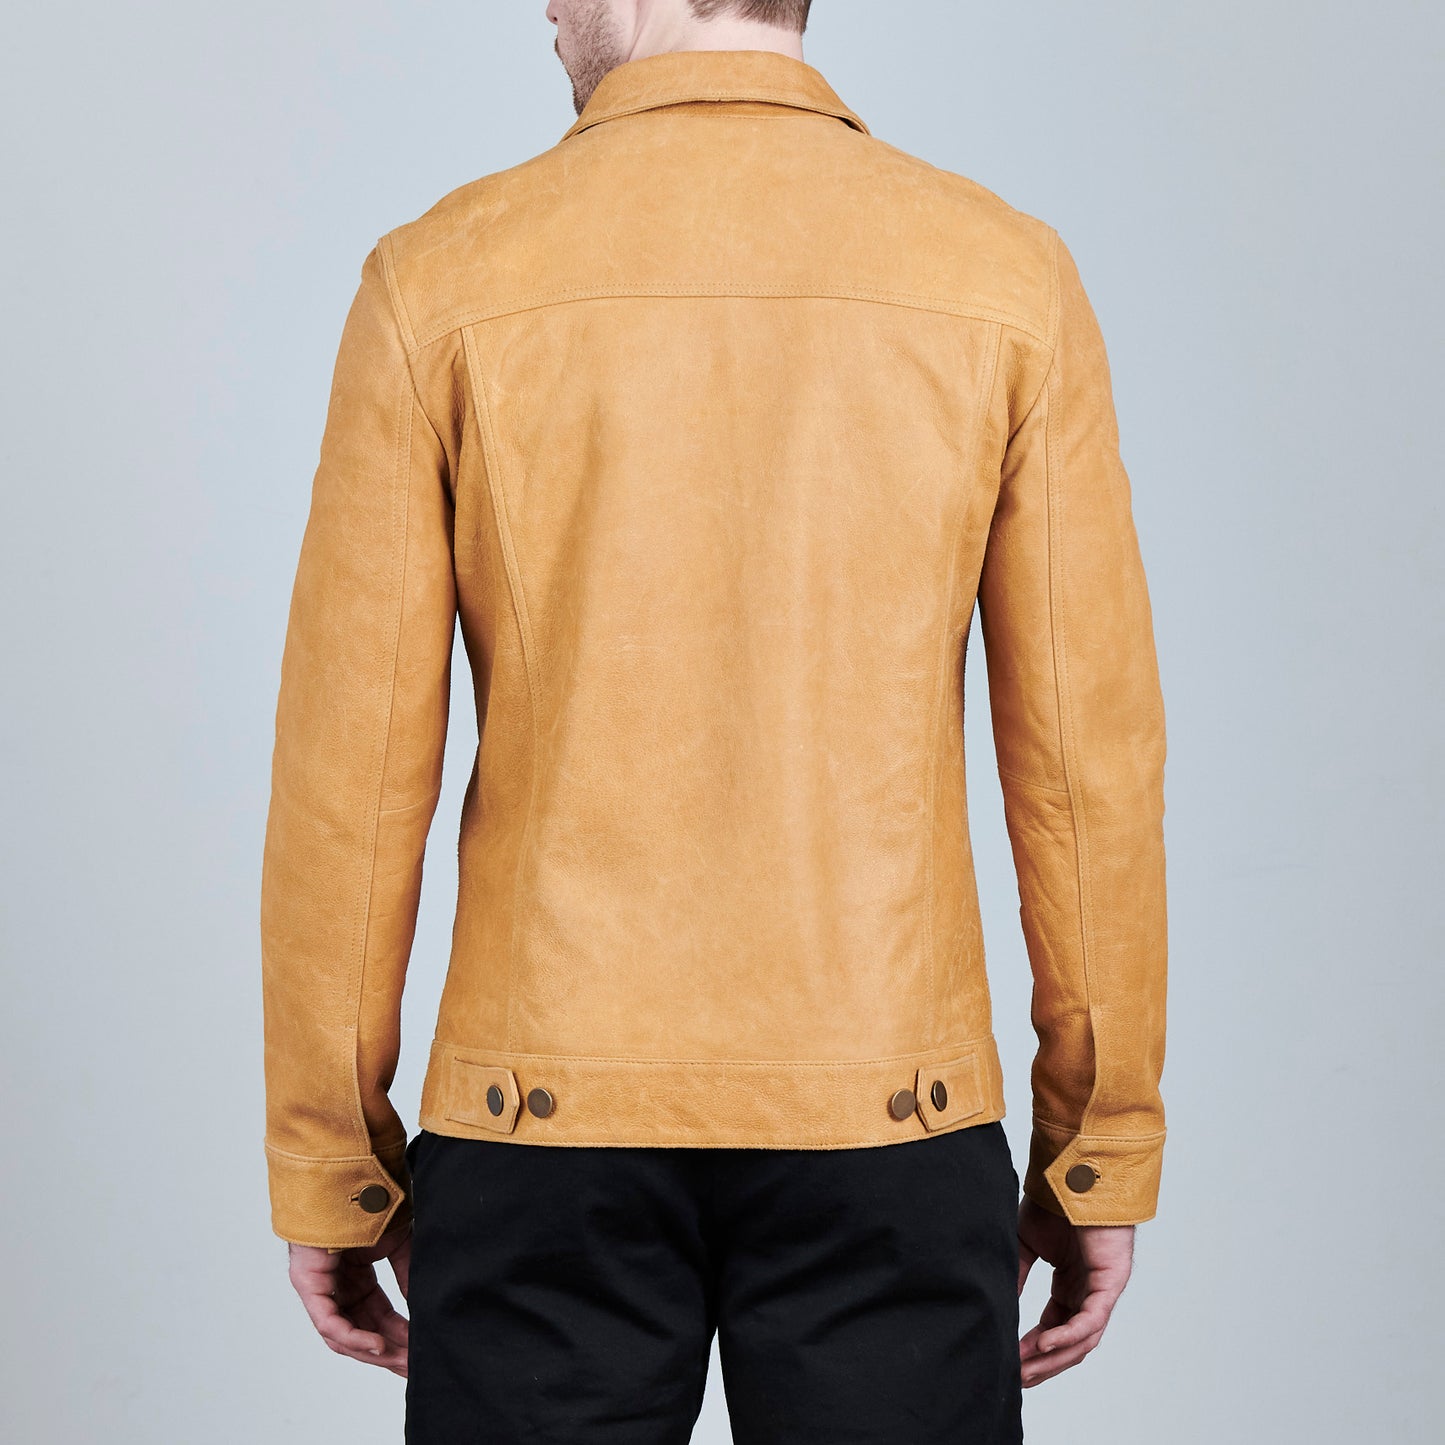 THE RANCHER JACKET